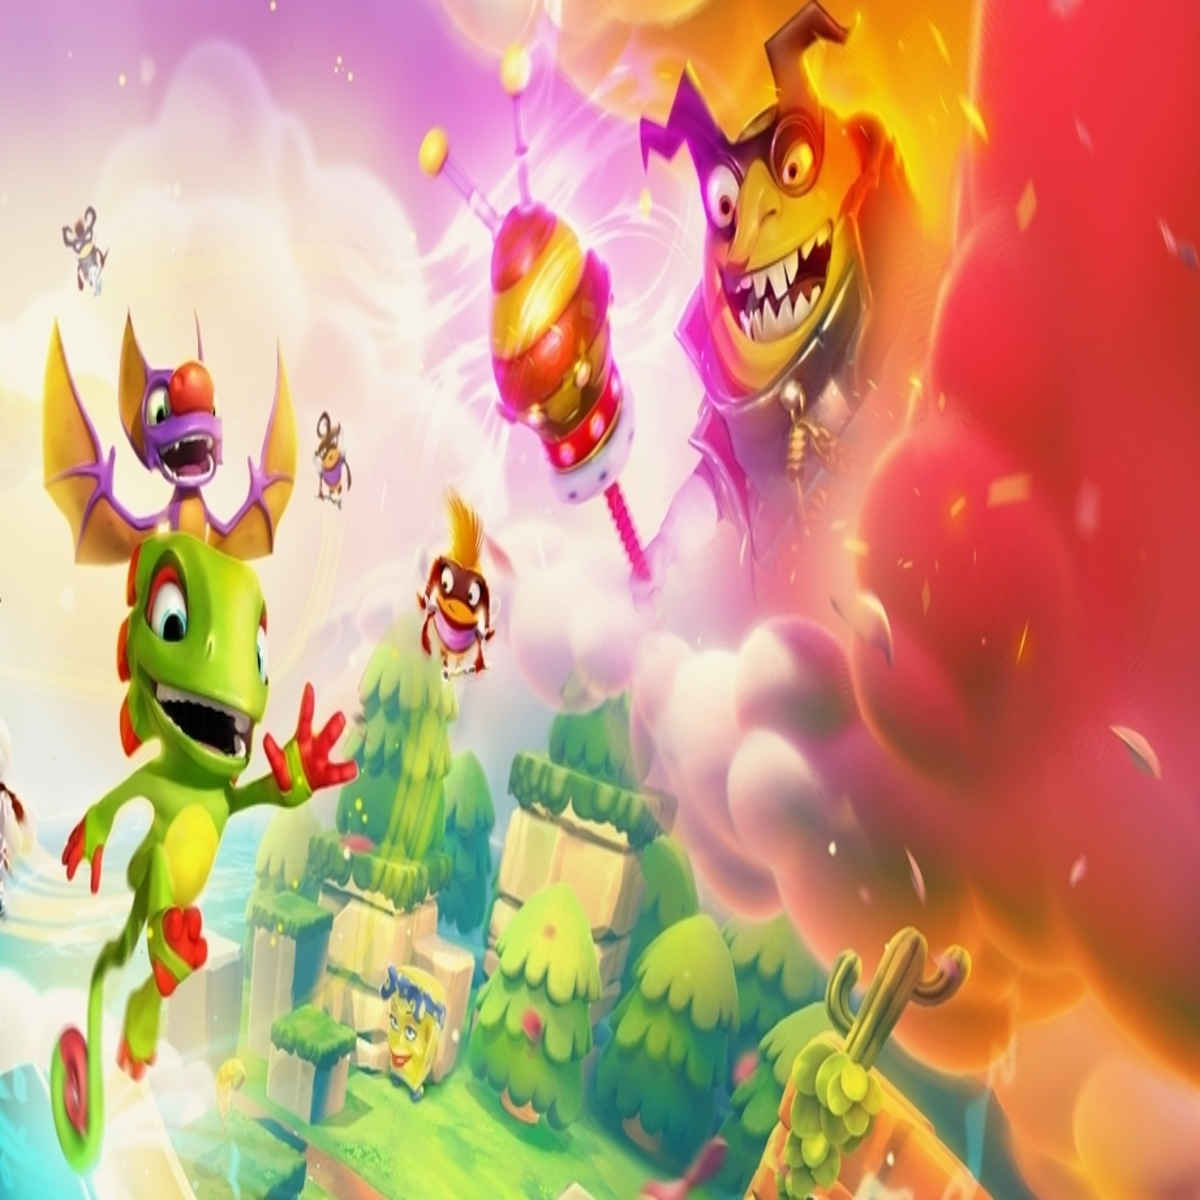 consoles the PC comes next Lair and month to Impossible Yooka-Laylee and